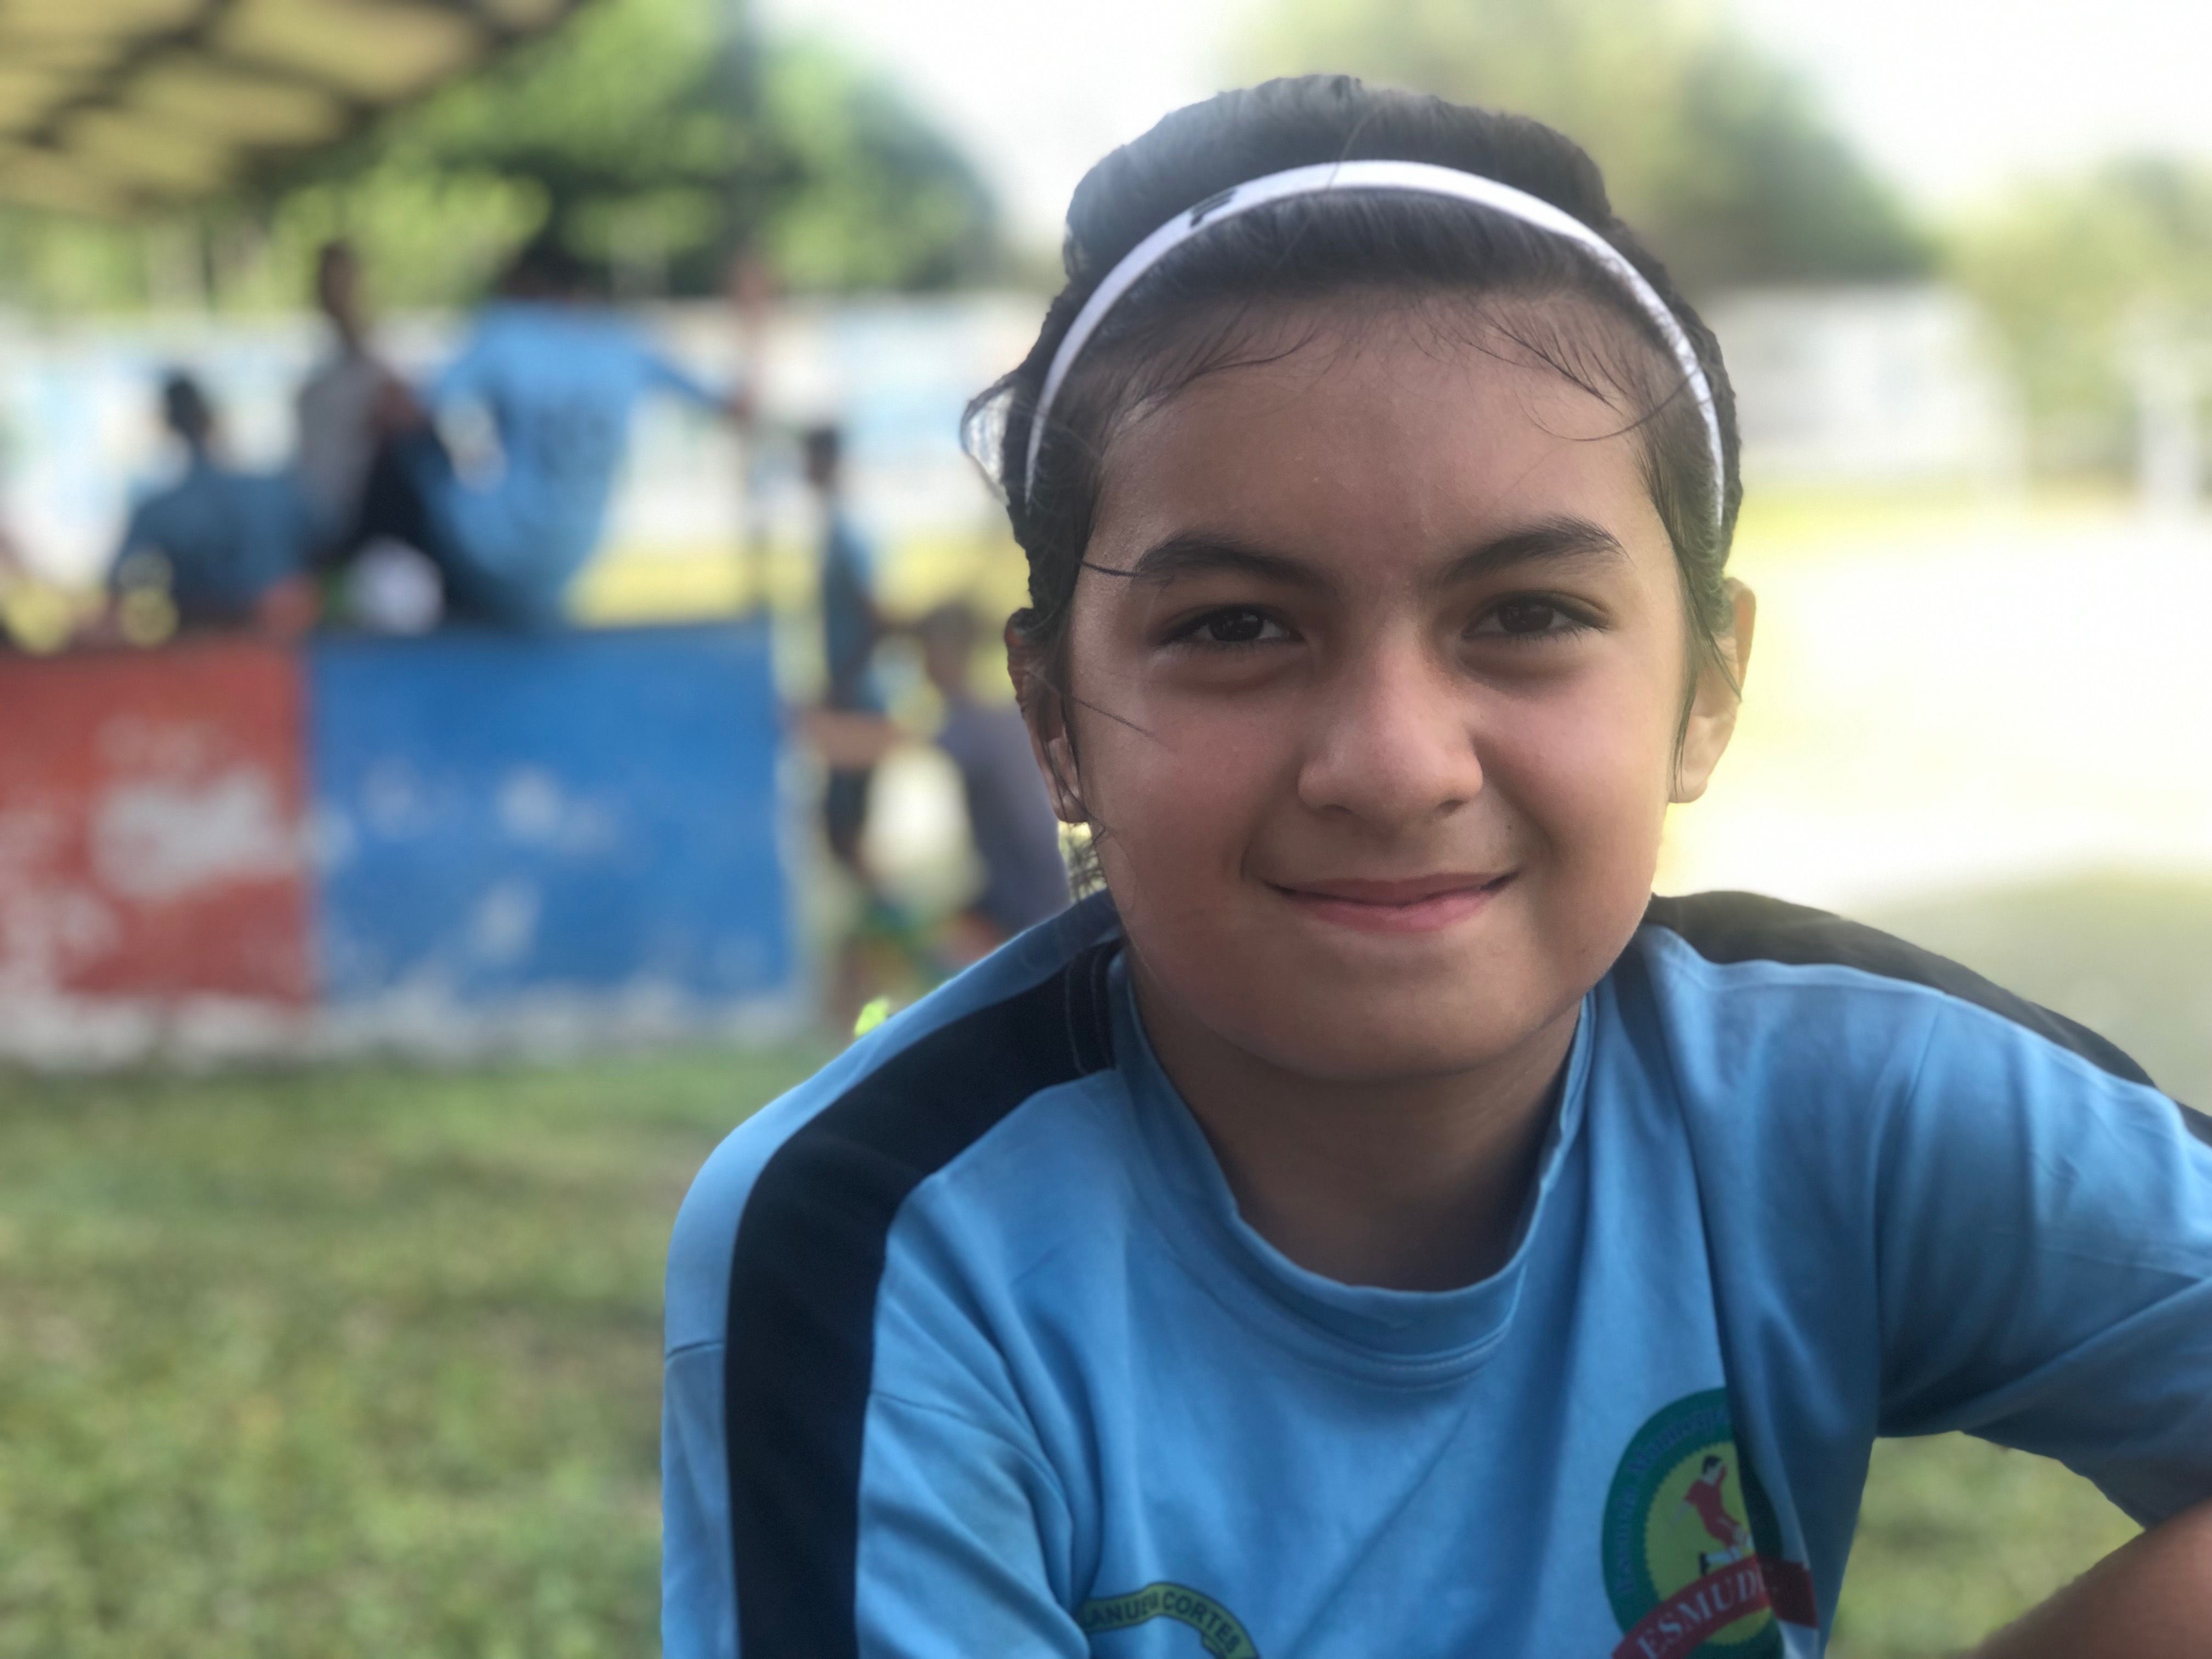 Astrid Ponse, 12, of Villanueva, loves watching the U.S. Women’s National Team play soccer and listening to the British rock band Queen. Image by Jaime Joyce/TIME for Kids. Honduras, 2019.